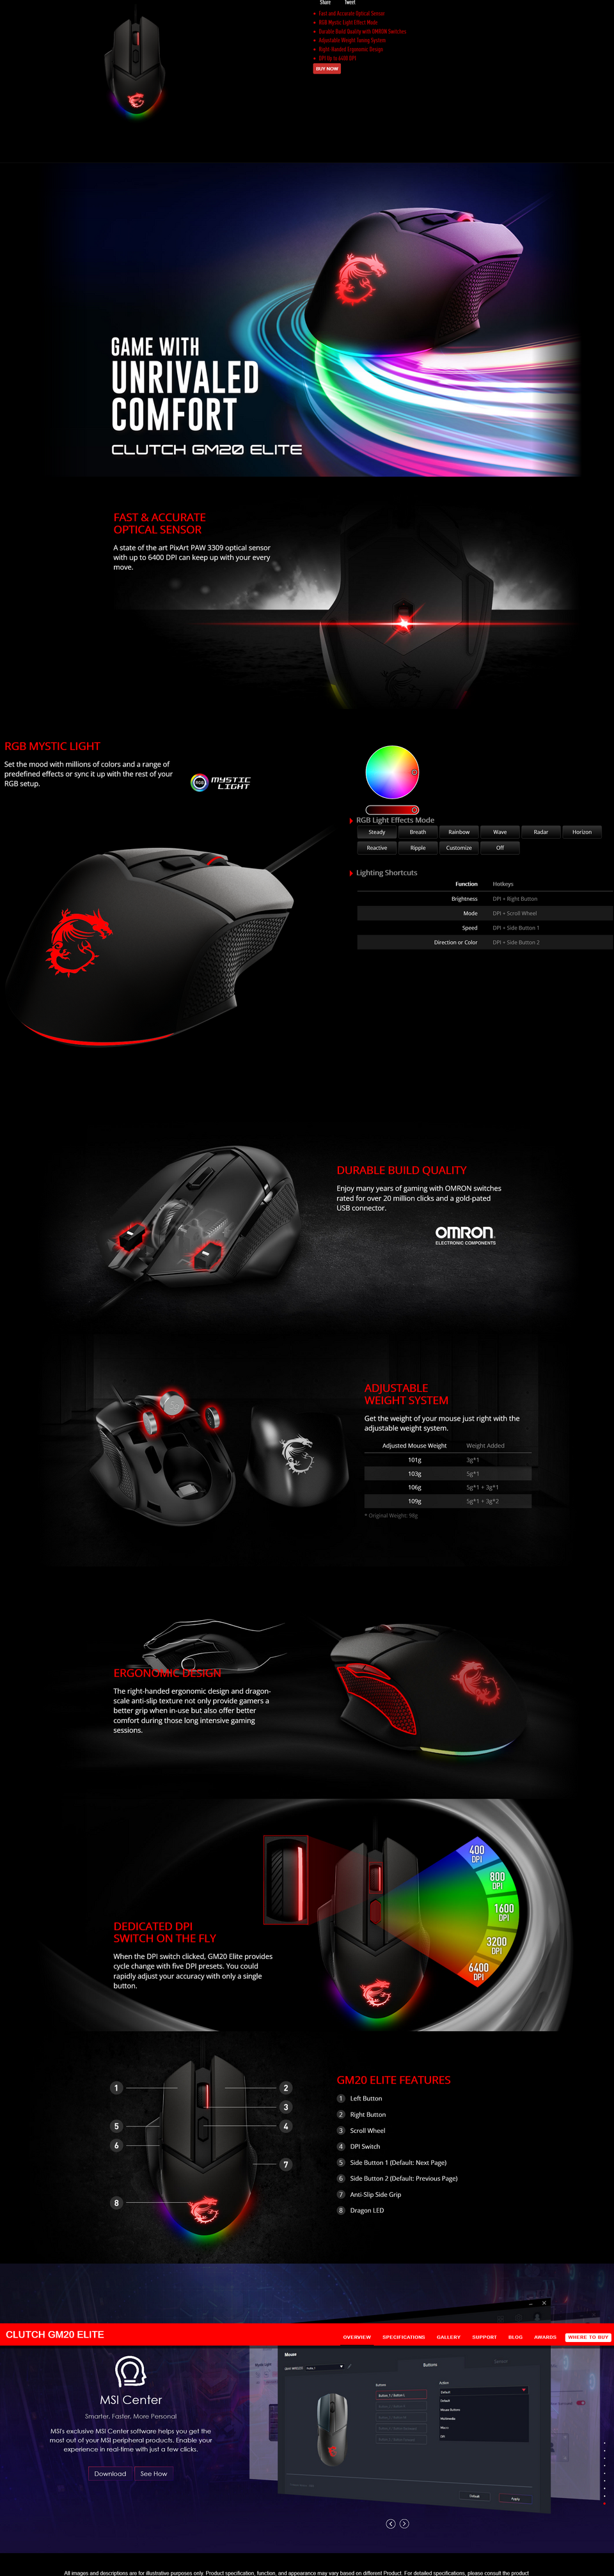 msi clutch gm20 elite gaming mouse